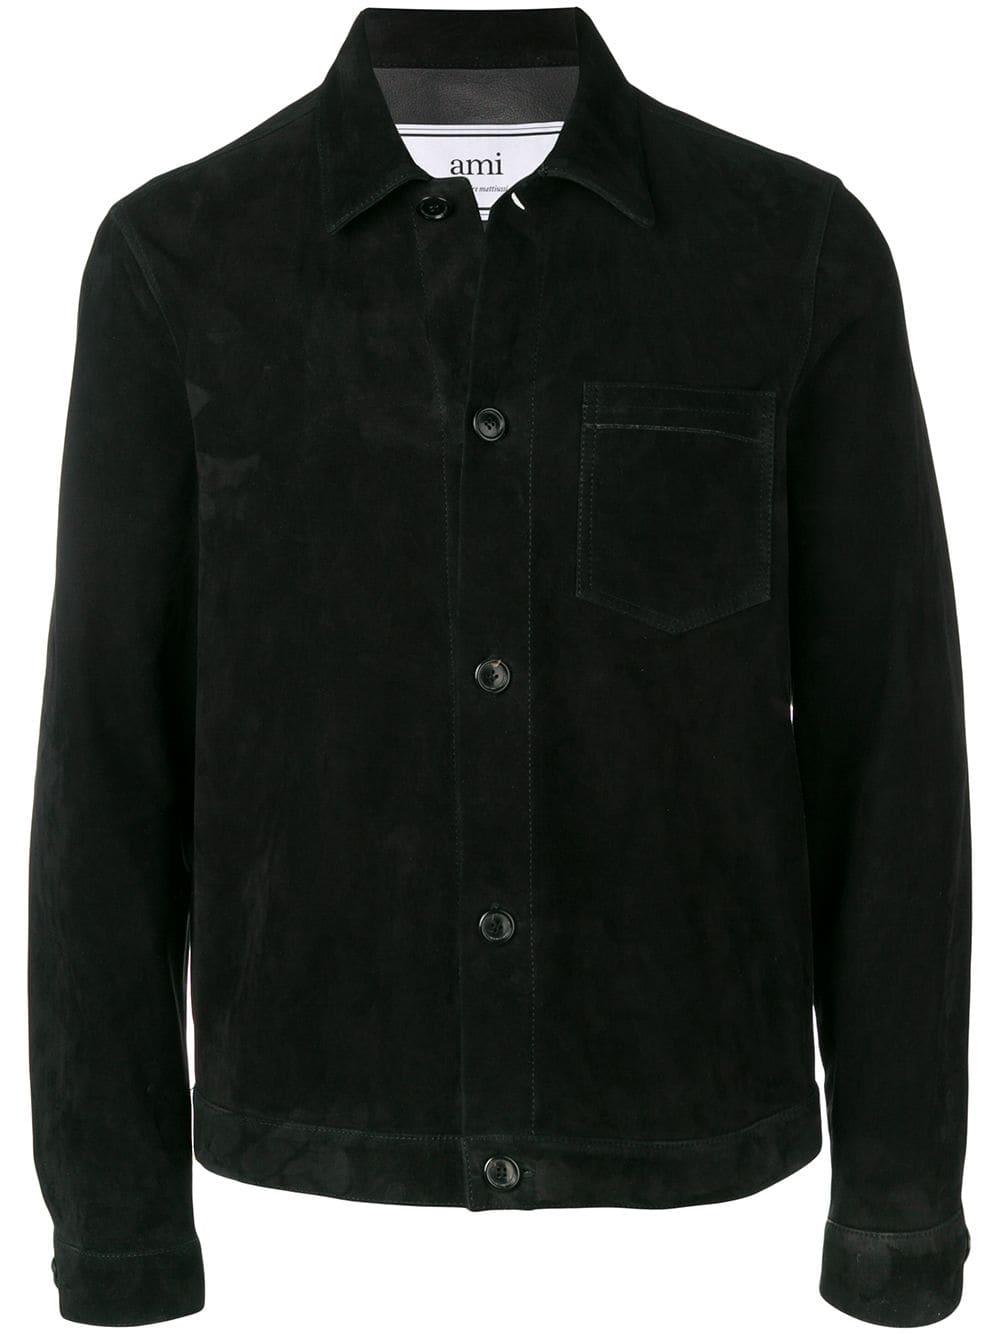 AMI Suede Overshirt in Black for Men - Lyst